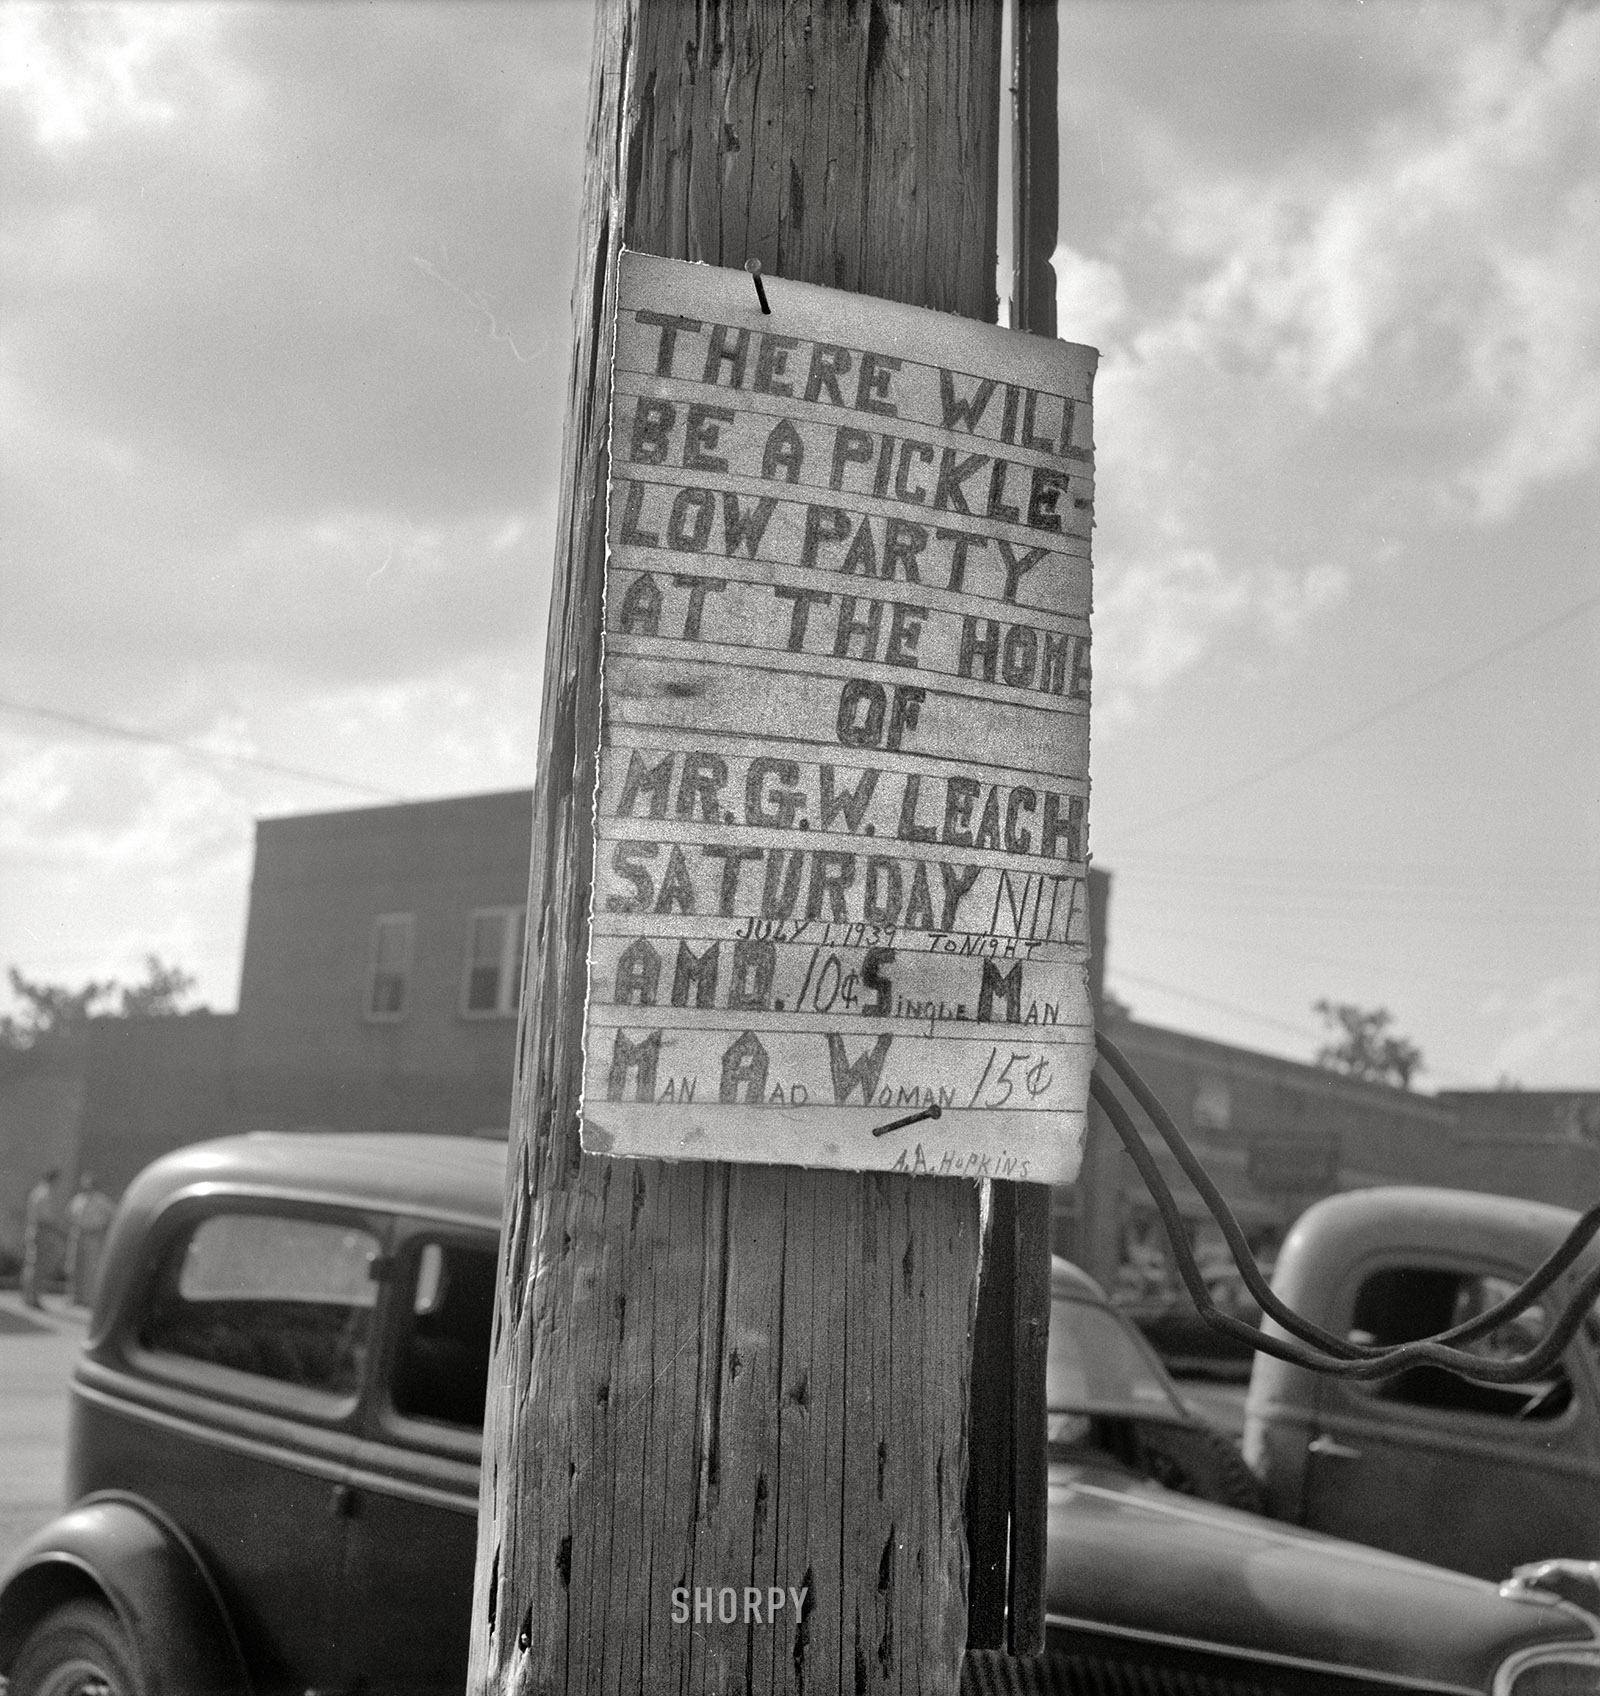 July 1939. "Sign tacked to pole near the post office. Main street, Pittsboro, North Carolina." This photo by Dorothea Lange, which has attracted no small amount of bemused commentary over the years, requires two avenues of explanation. The first is that Lange was a connoisseur of quirky signage, snapping away at whatever outre malapropism, mangled spelling or jarring juxtaposition might present itself by the side of the road  (see here, here, here, here and here; there are dozens more). The second is that "piccolo" was Depression-era slang for jukebox or nickelodeon; a piccolo party's dancing was to canned music rather than a live band. Hence the PICKLE-LOW PARTY that will go on forever, thanks to the combined efforts of G.W. Leach, A.A. Hopkins and D. Lange. View full size.